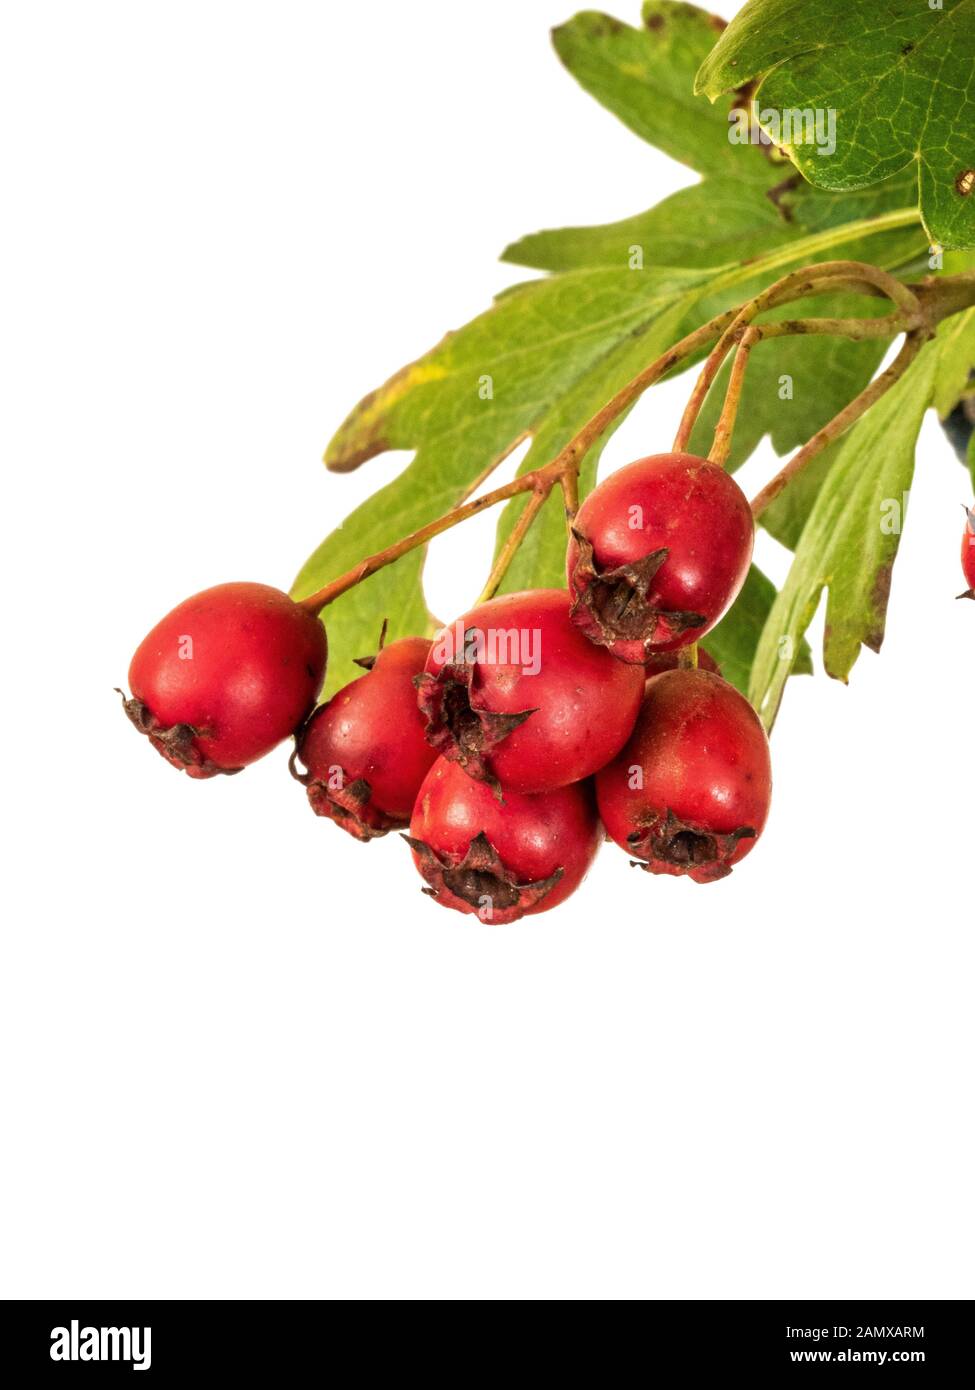 A close up of the bright red berries of hawthorn - Crataegus monogyna against a clear white background Stock Photo